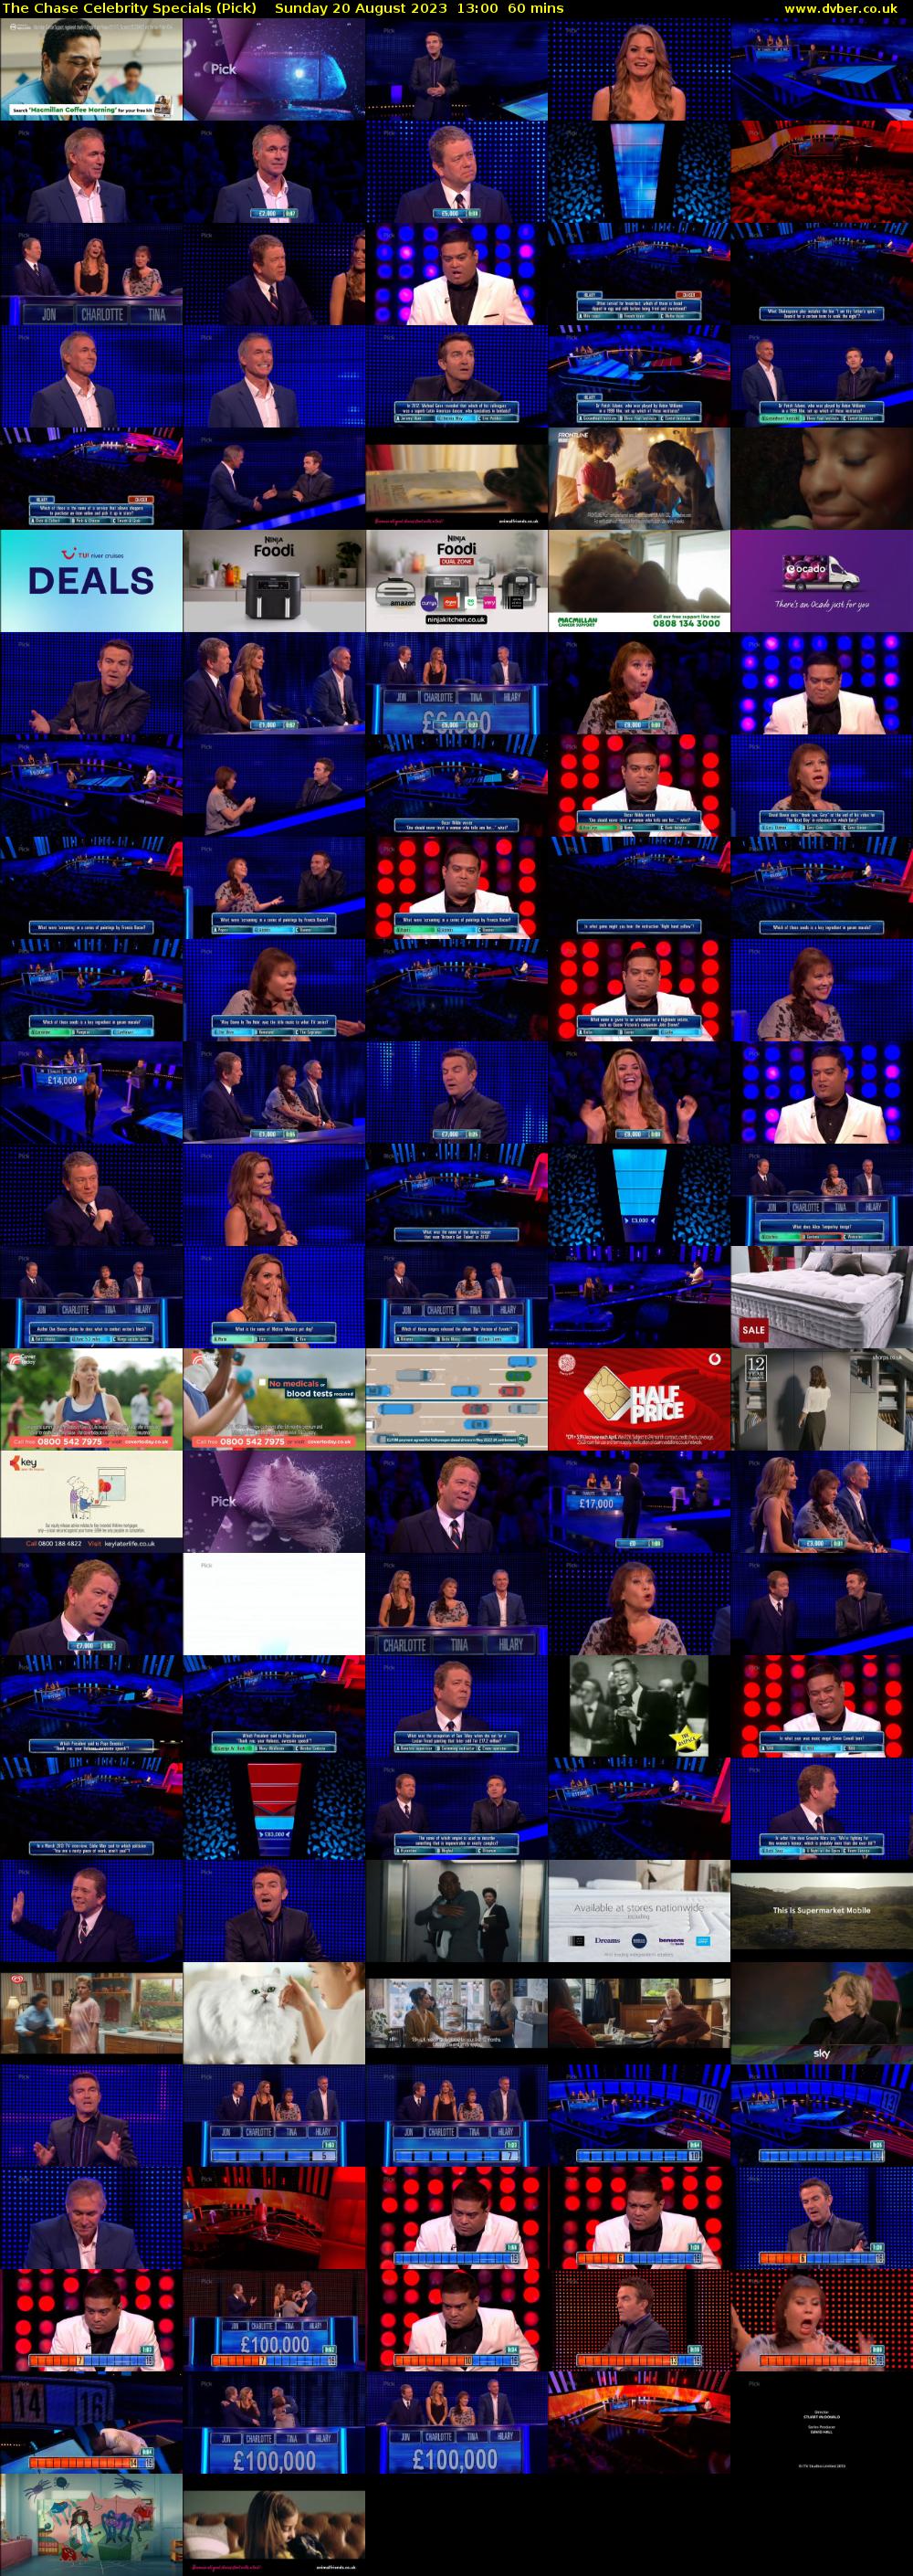 The Chase Celebrity Specials (Pick) Sunday 20 August 2023 13:00 - 14:00